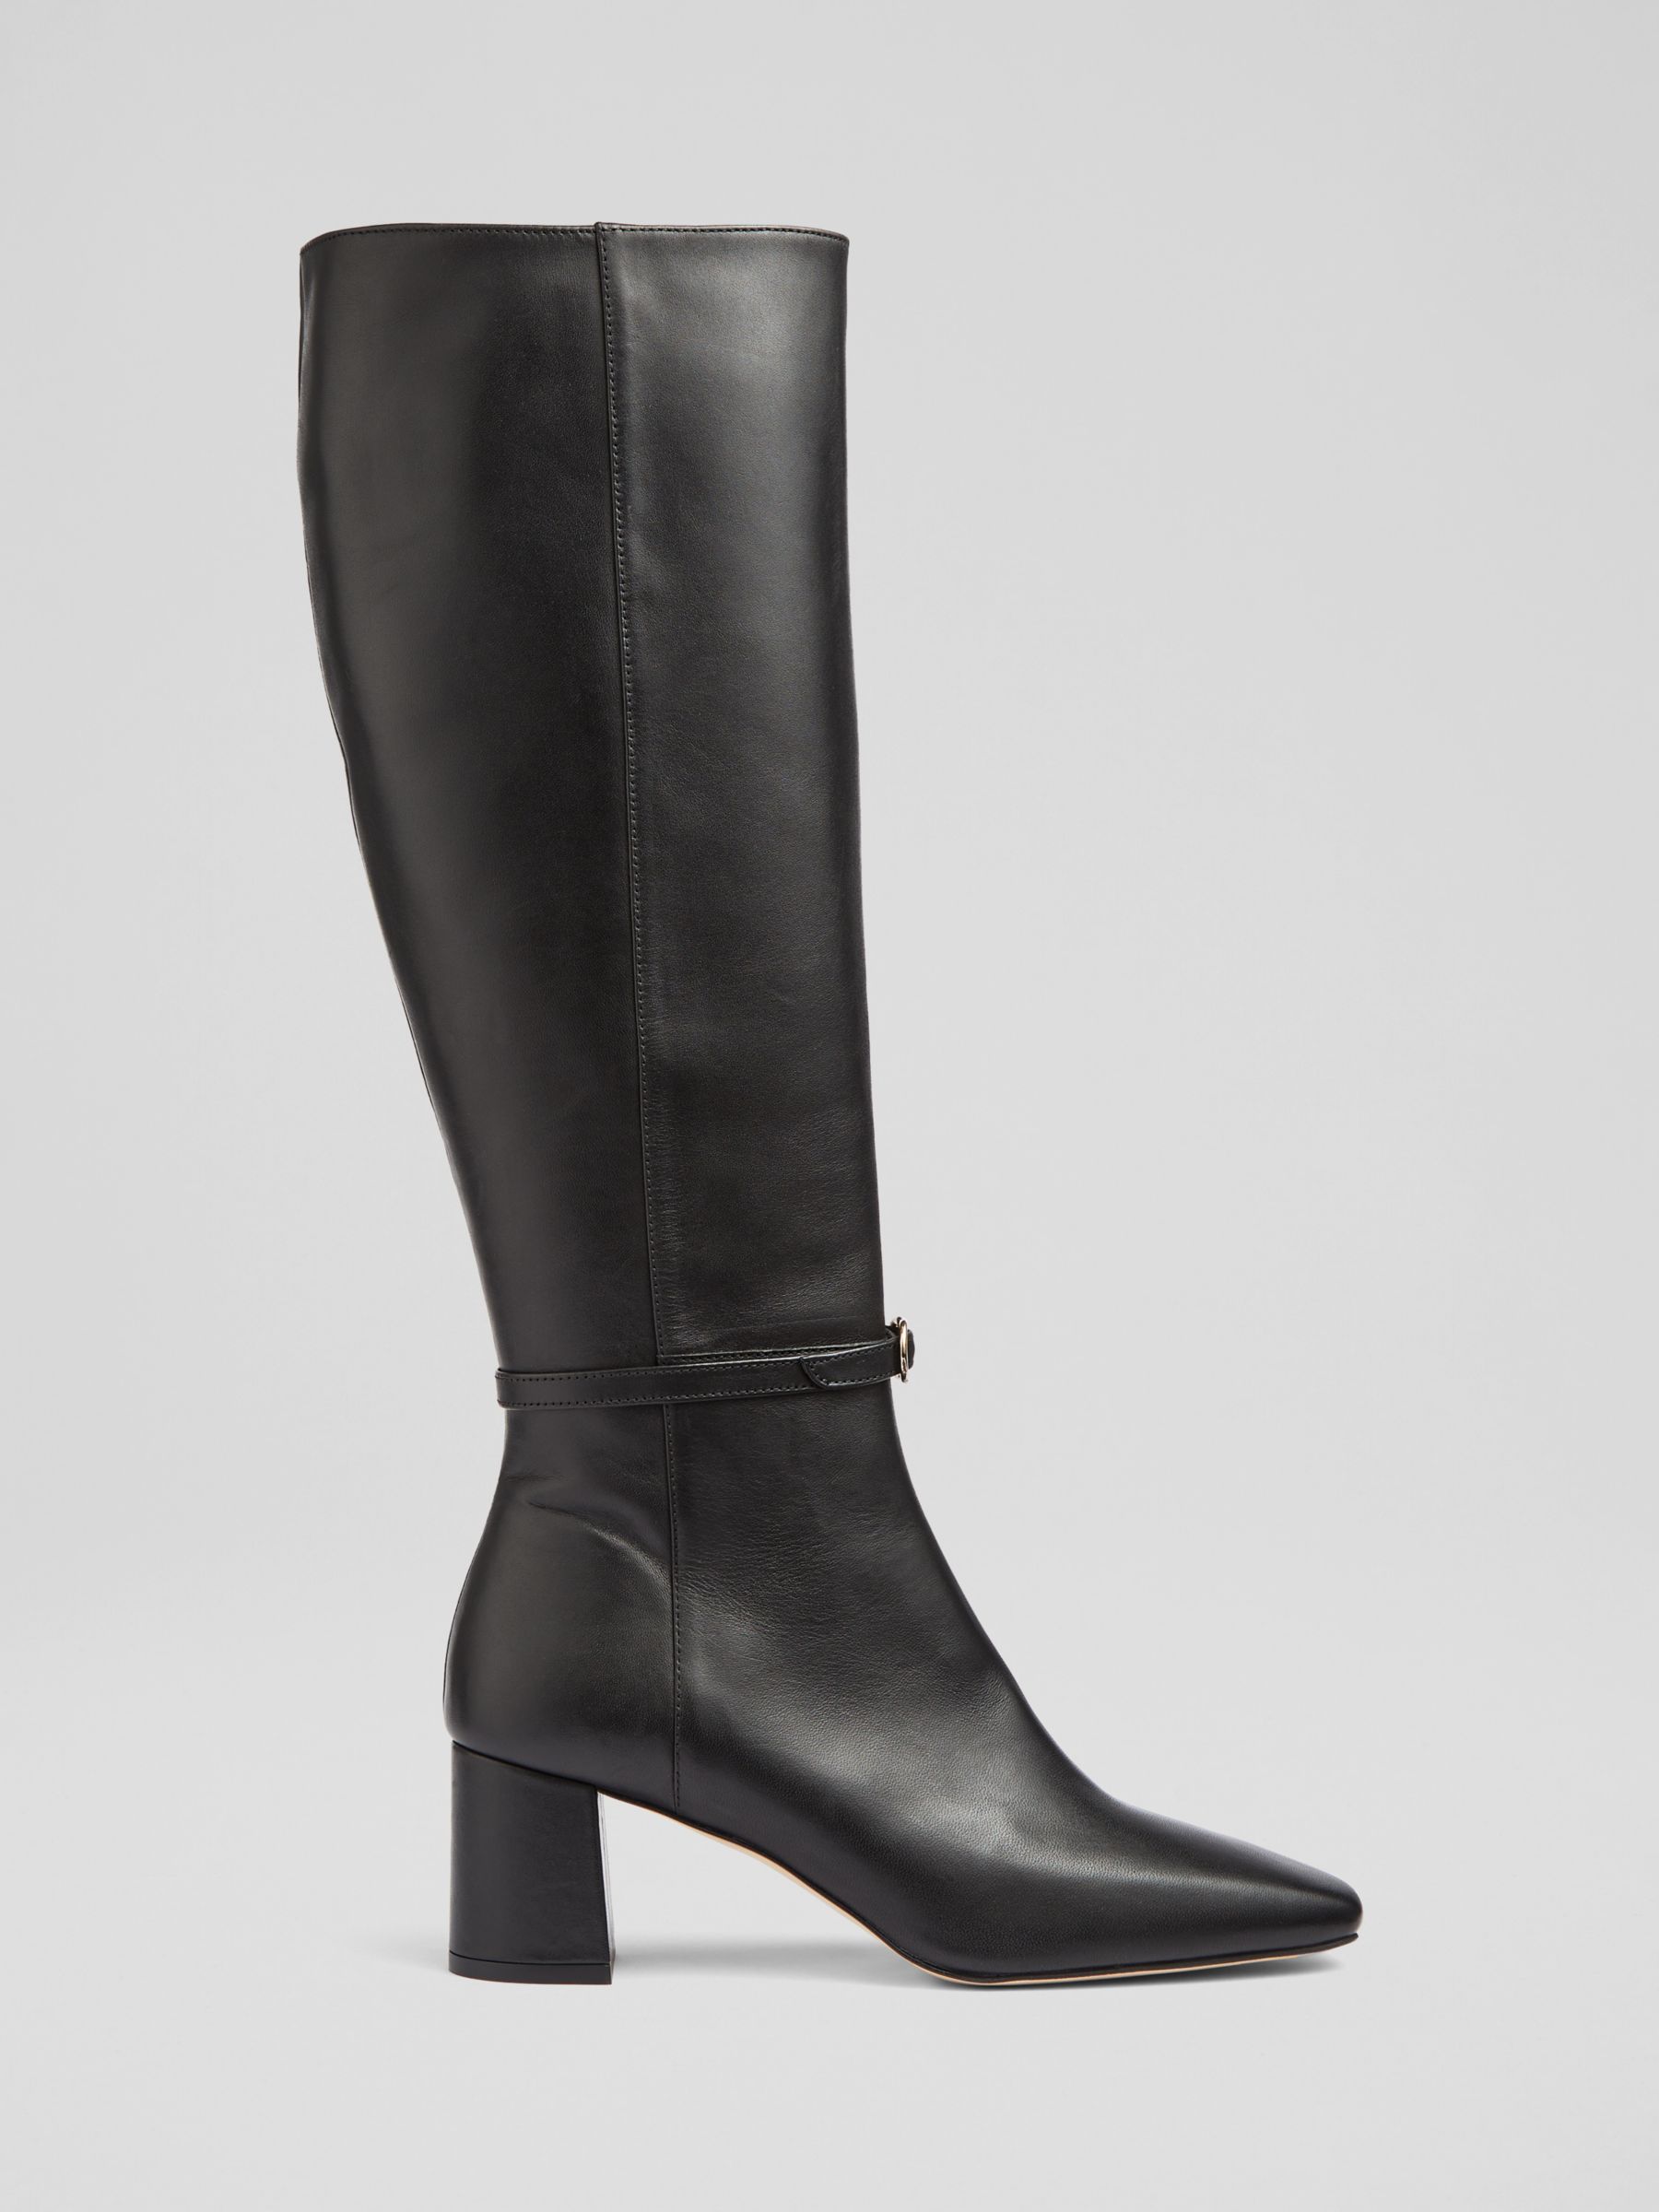 L.K.Bennett x Ascot Collection: Sylvia Leather Knee High Boots, Black ...